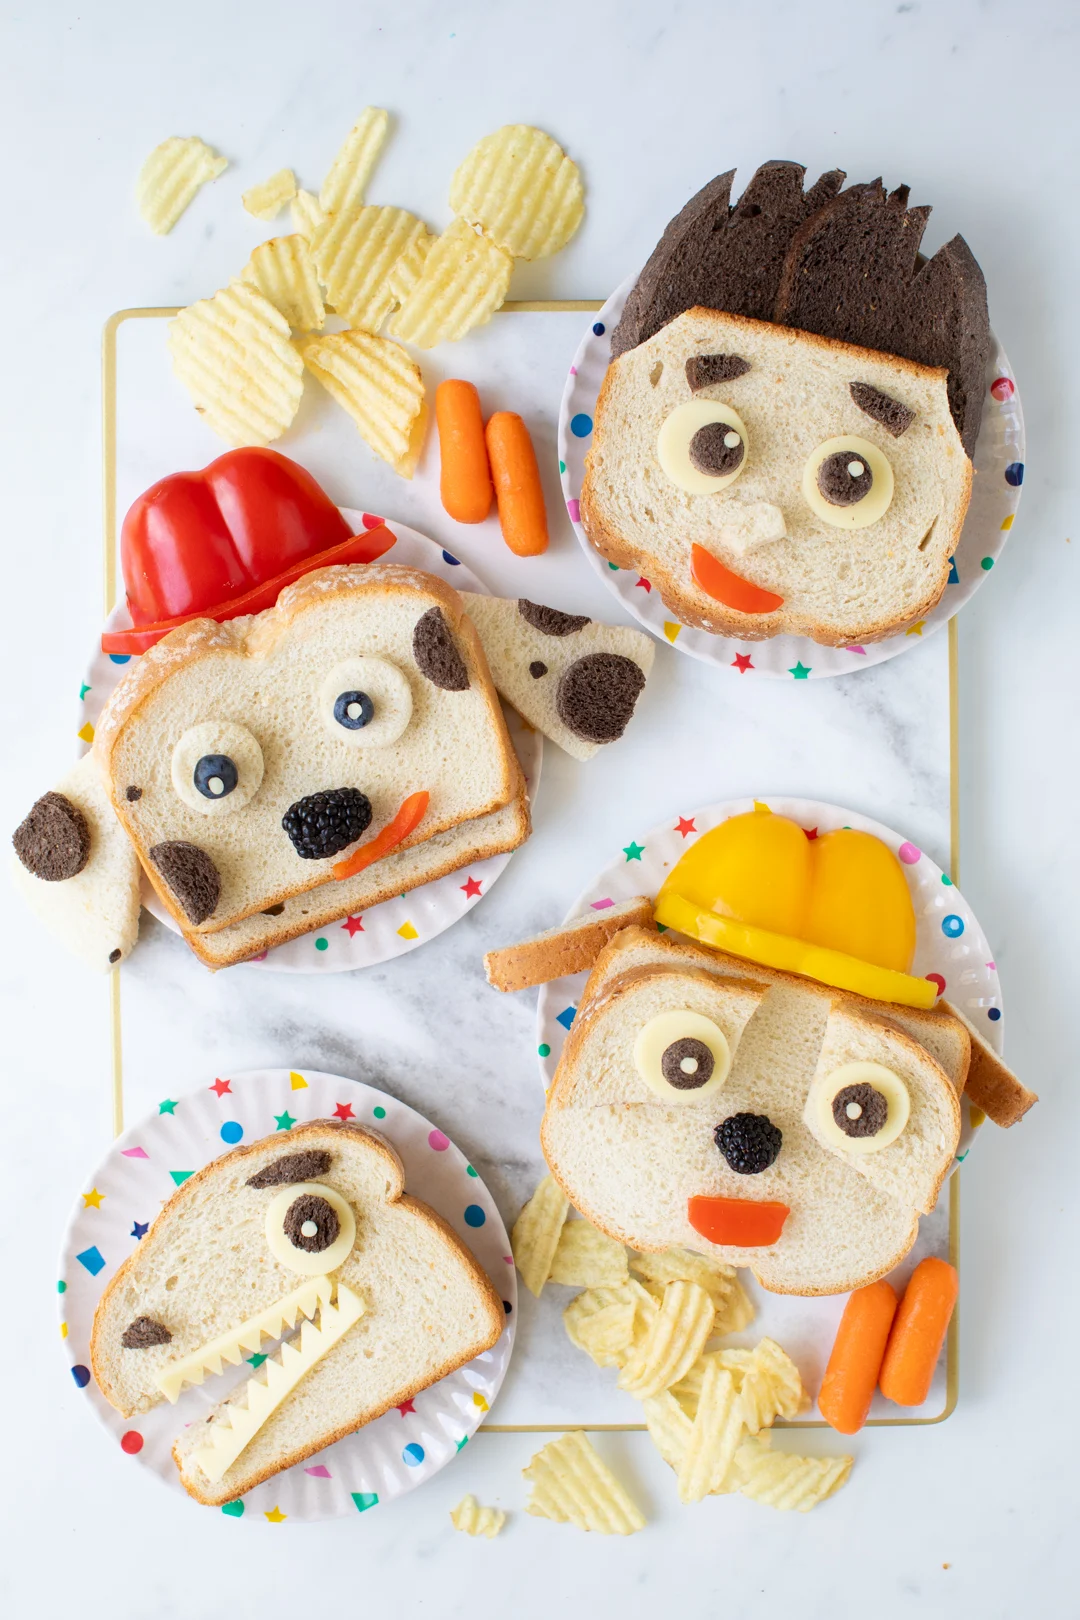 paw patrol sandwiches, ryder, rubble, marshall, dino